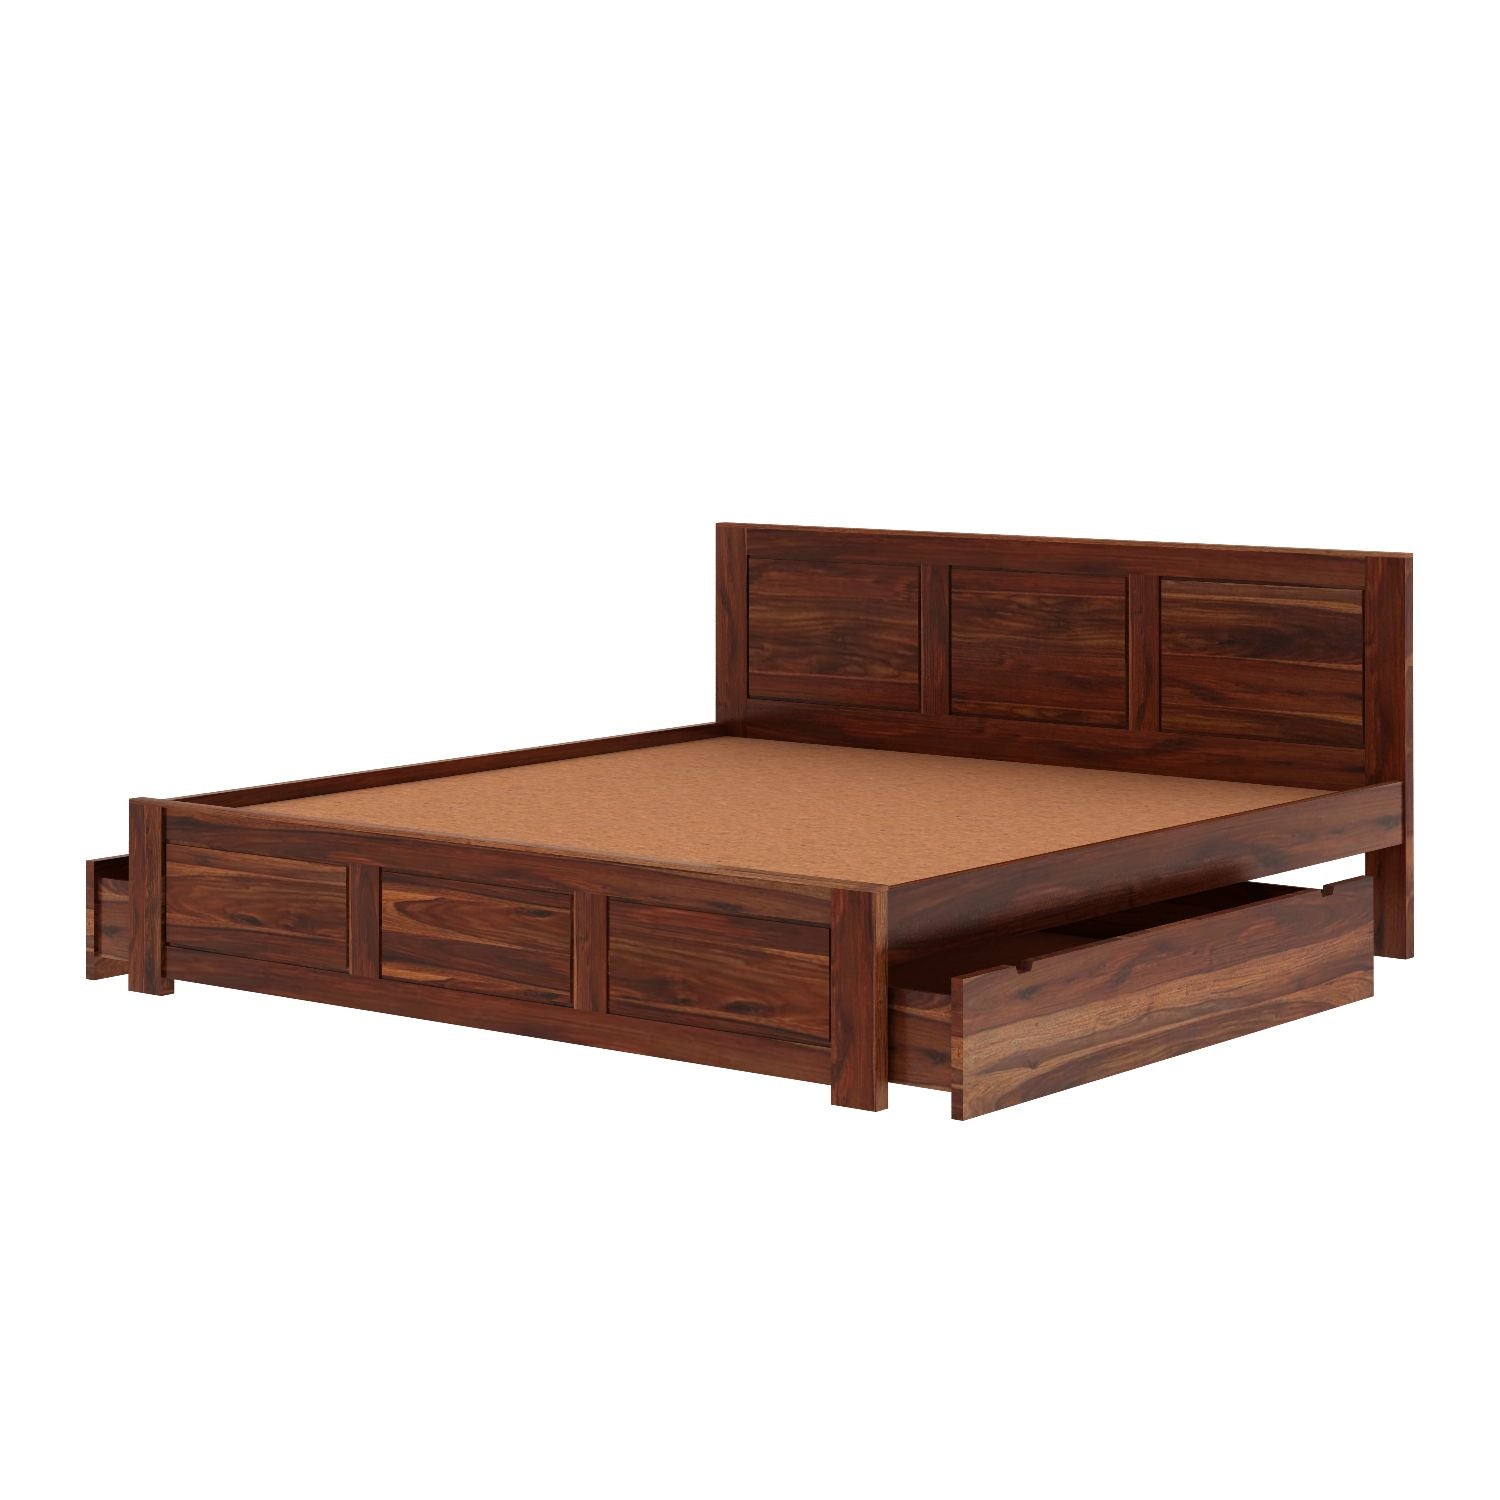 Woodwing Solid Sheesham Wood Bed With Two Drawers (Queen Size, Natural Finish)